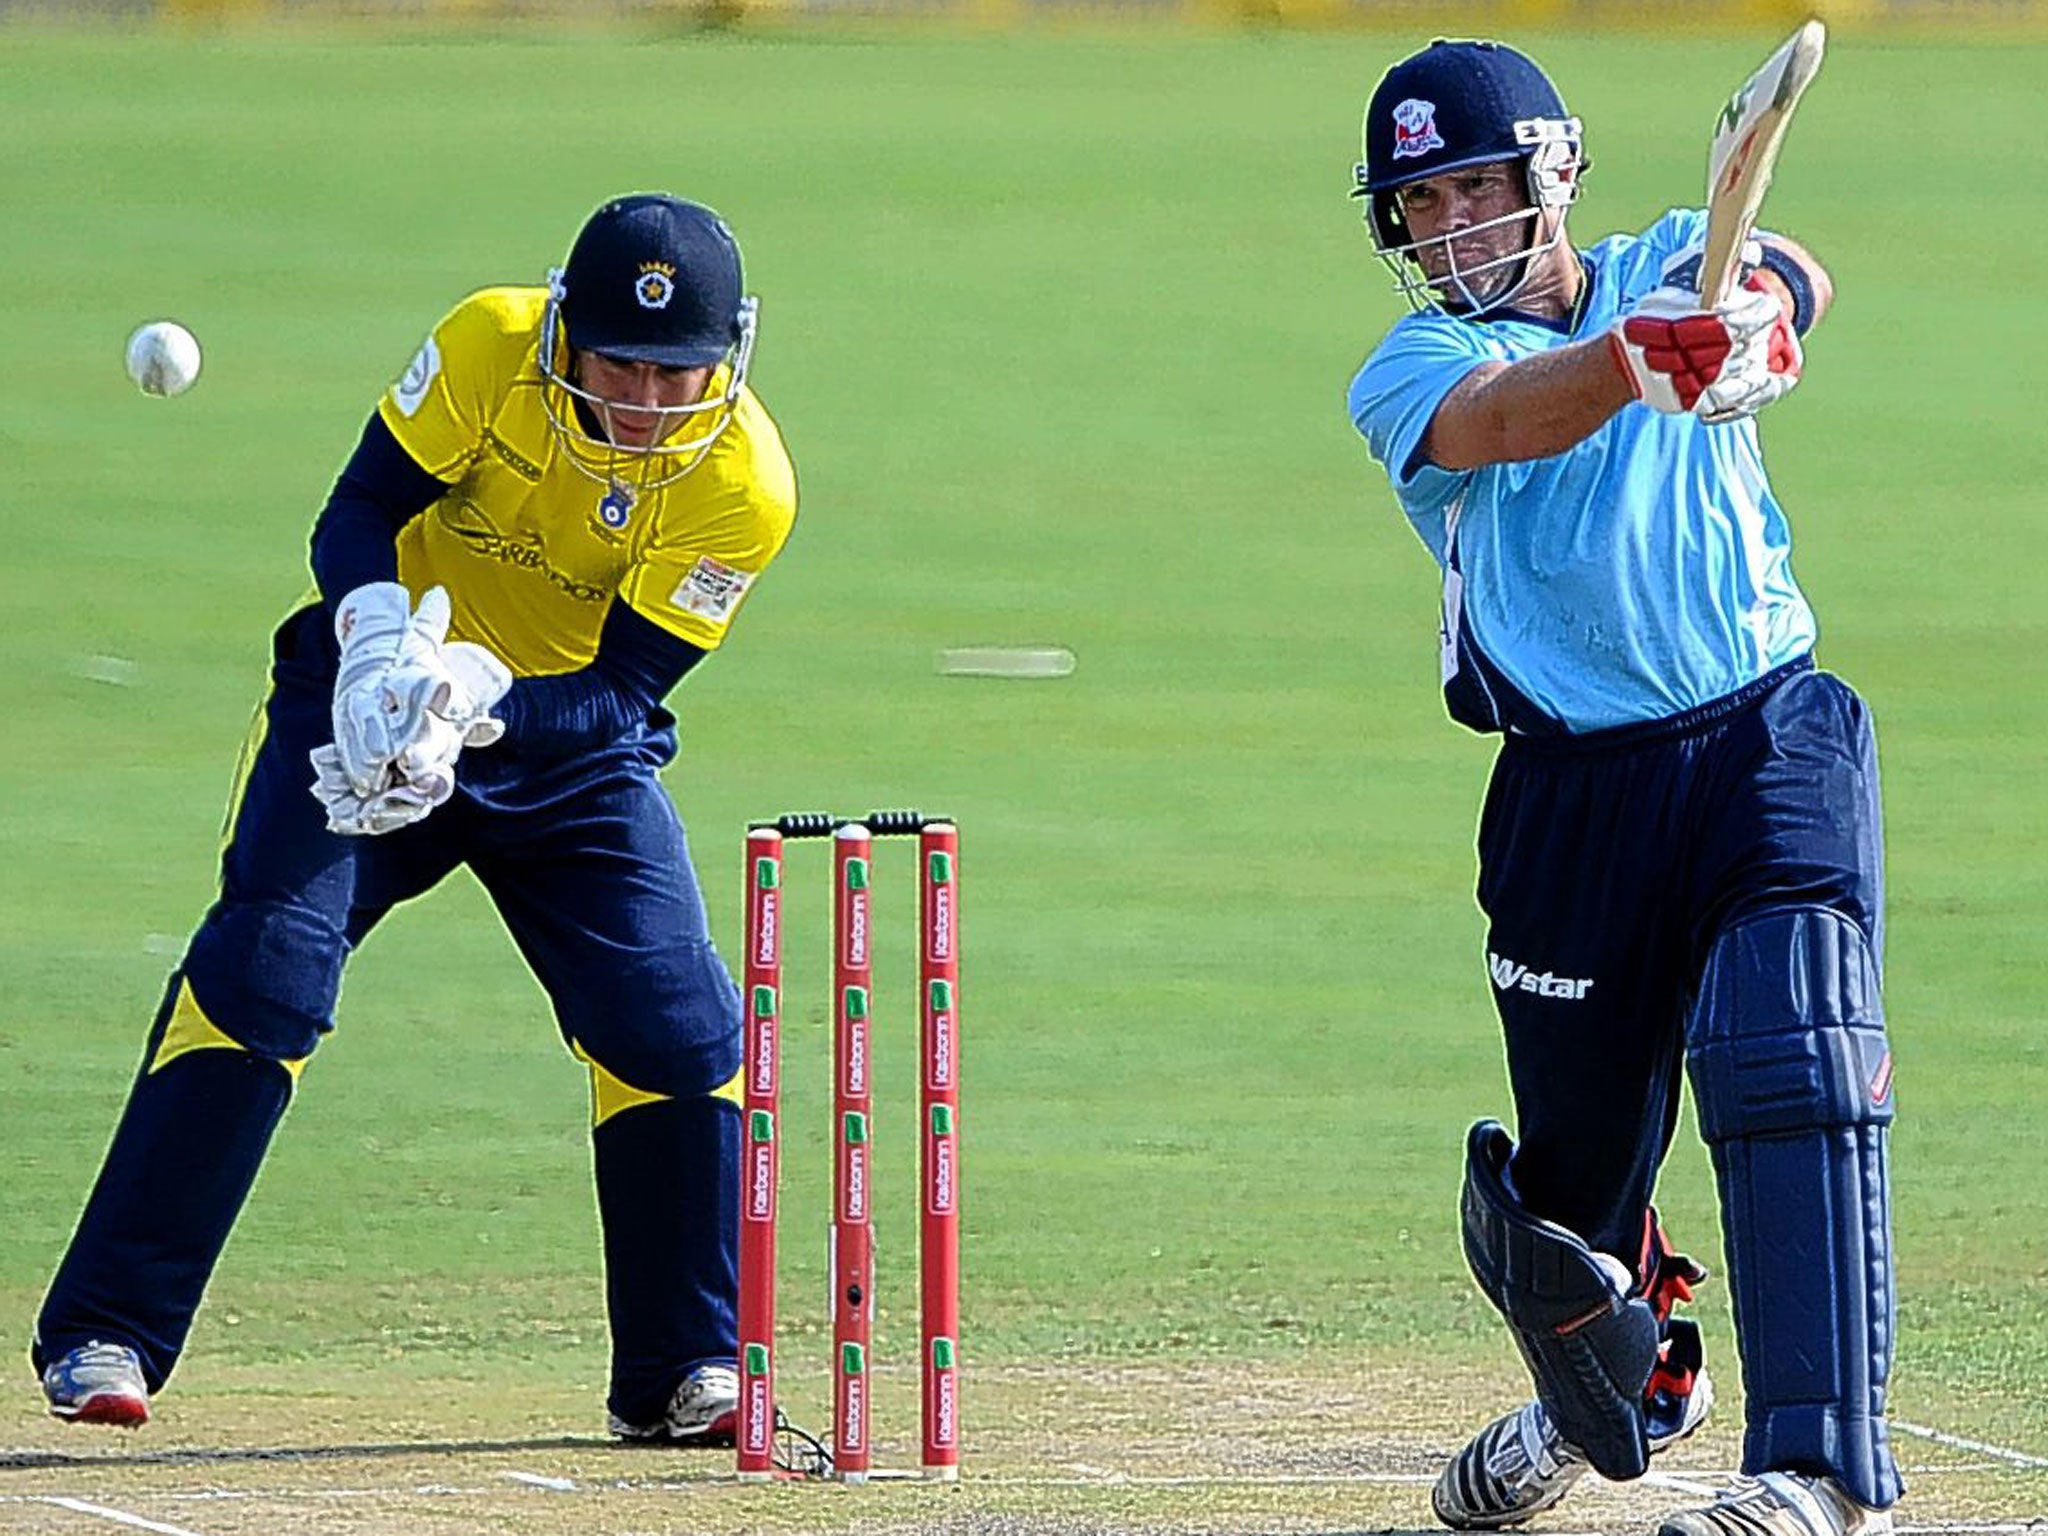 Lou Vincent, pictured batting in the 2012 Champions League, could face charges in relation to matches in the tournament two years ago